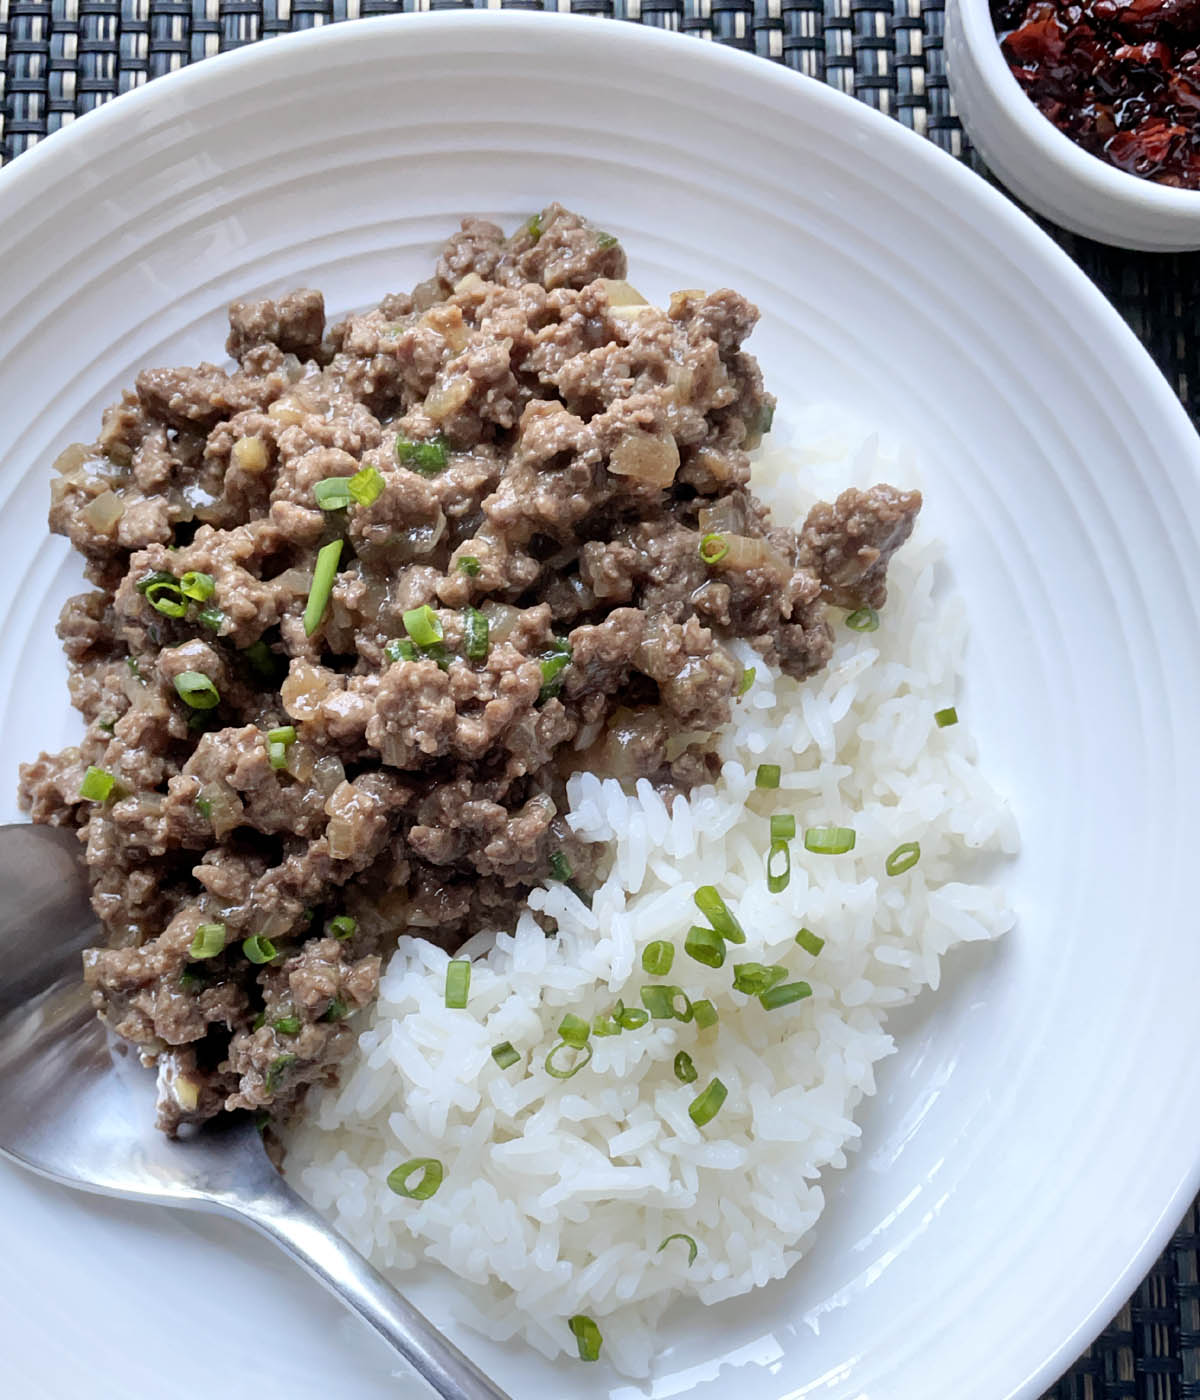 A round white bowl containing a metal spoon, white cooked rice, cooked ground beef, chopped green onions.